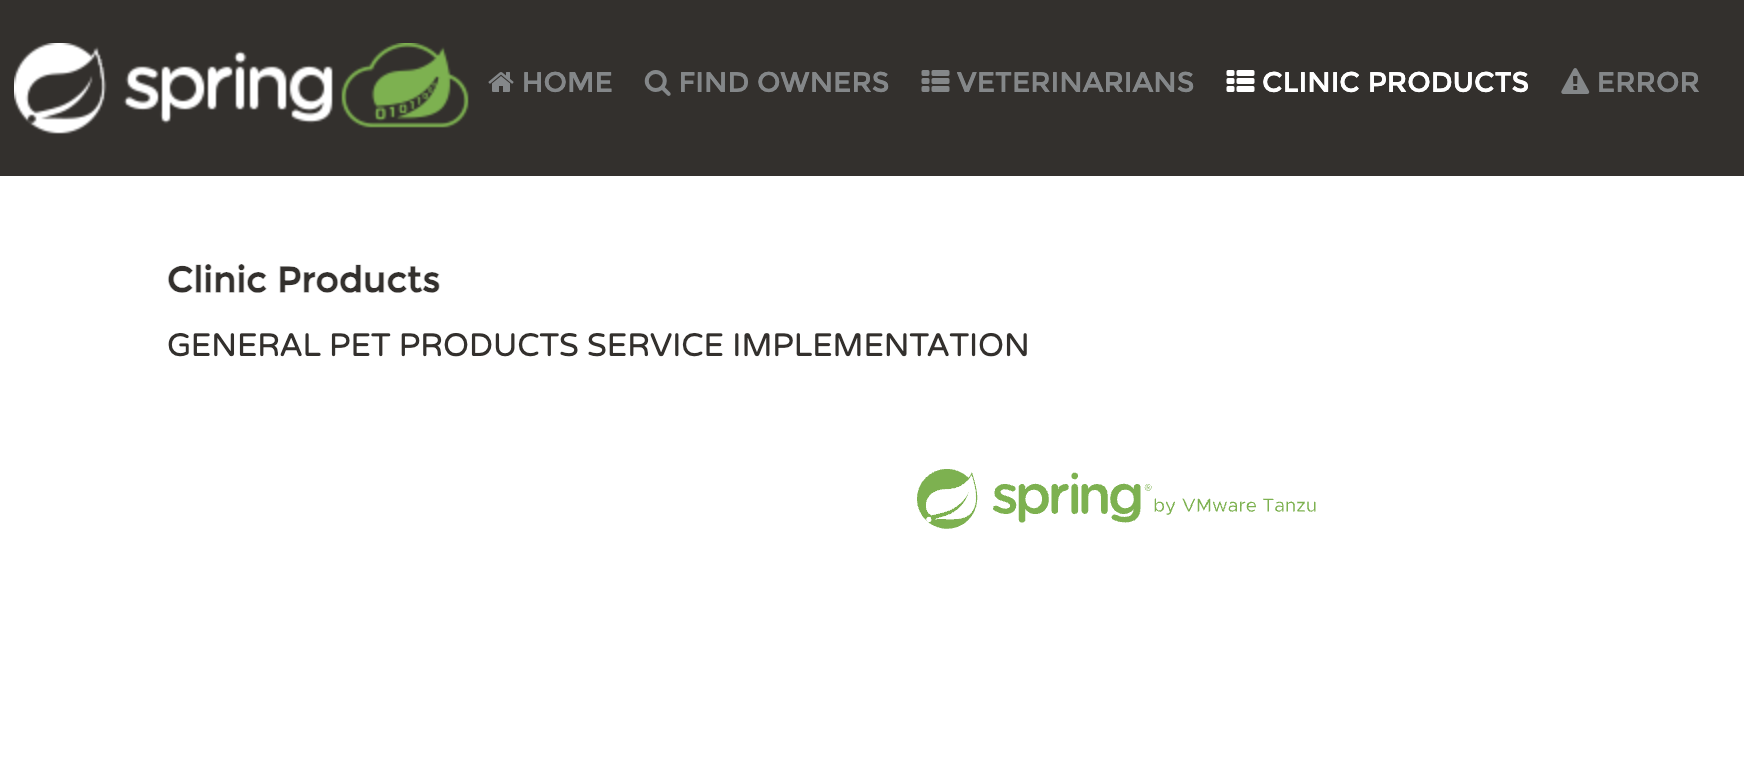 The browser now shows that the product service is targeted.